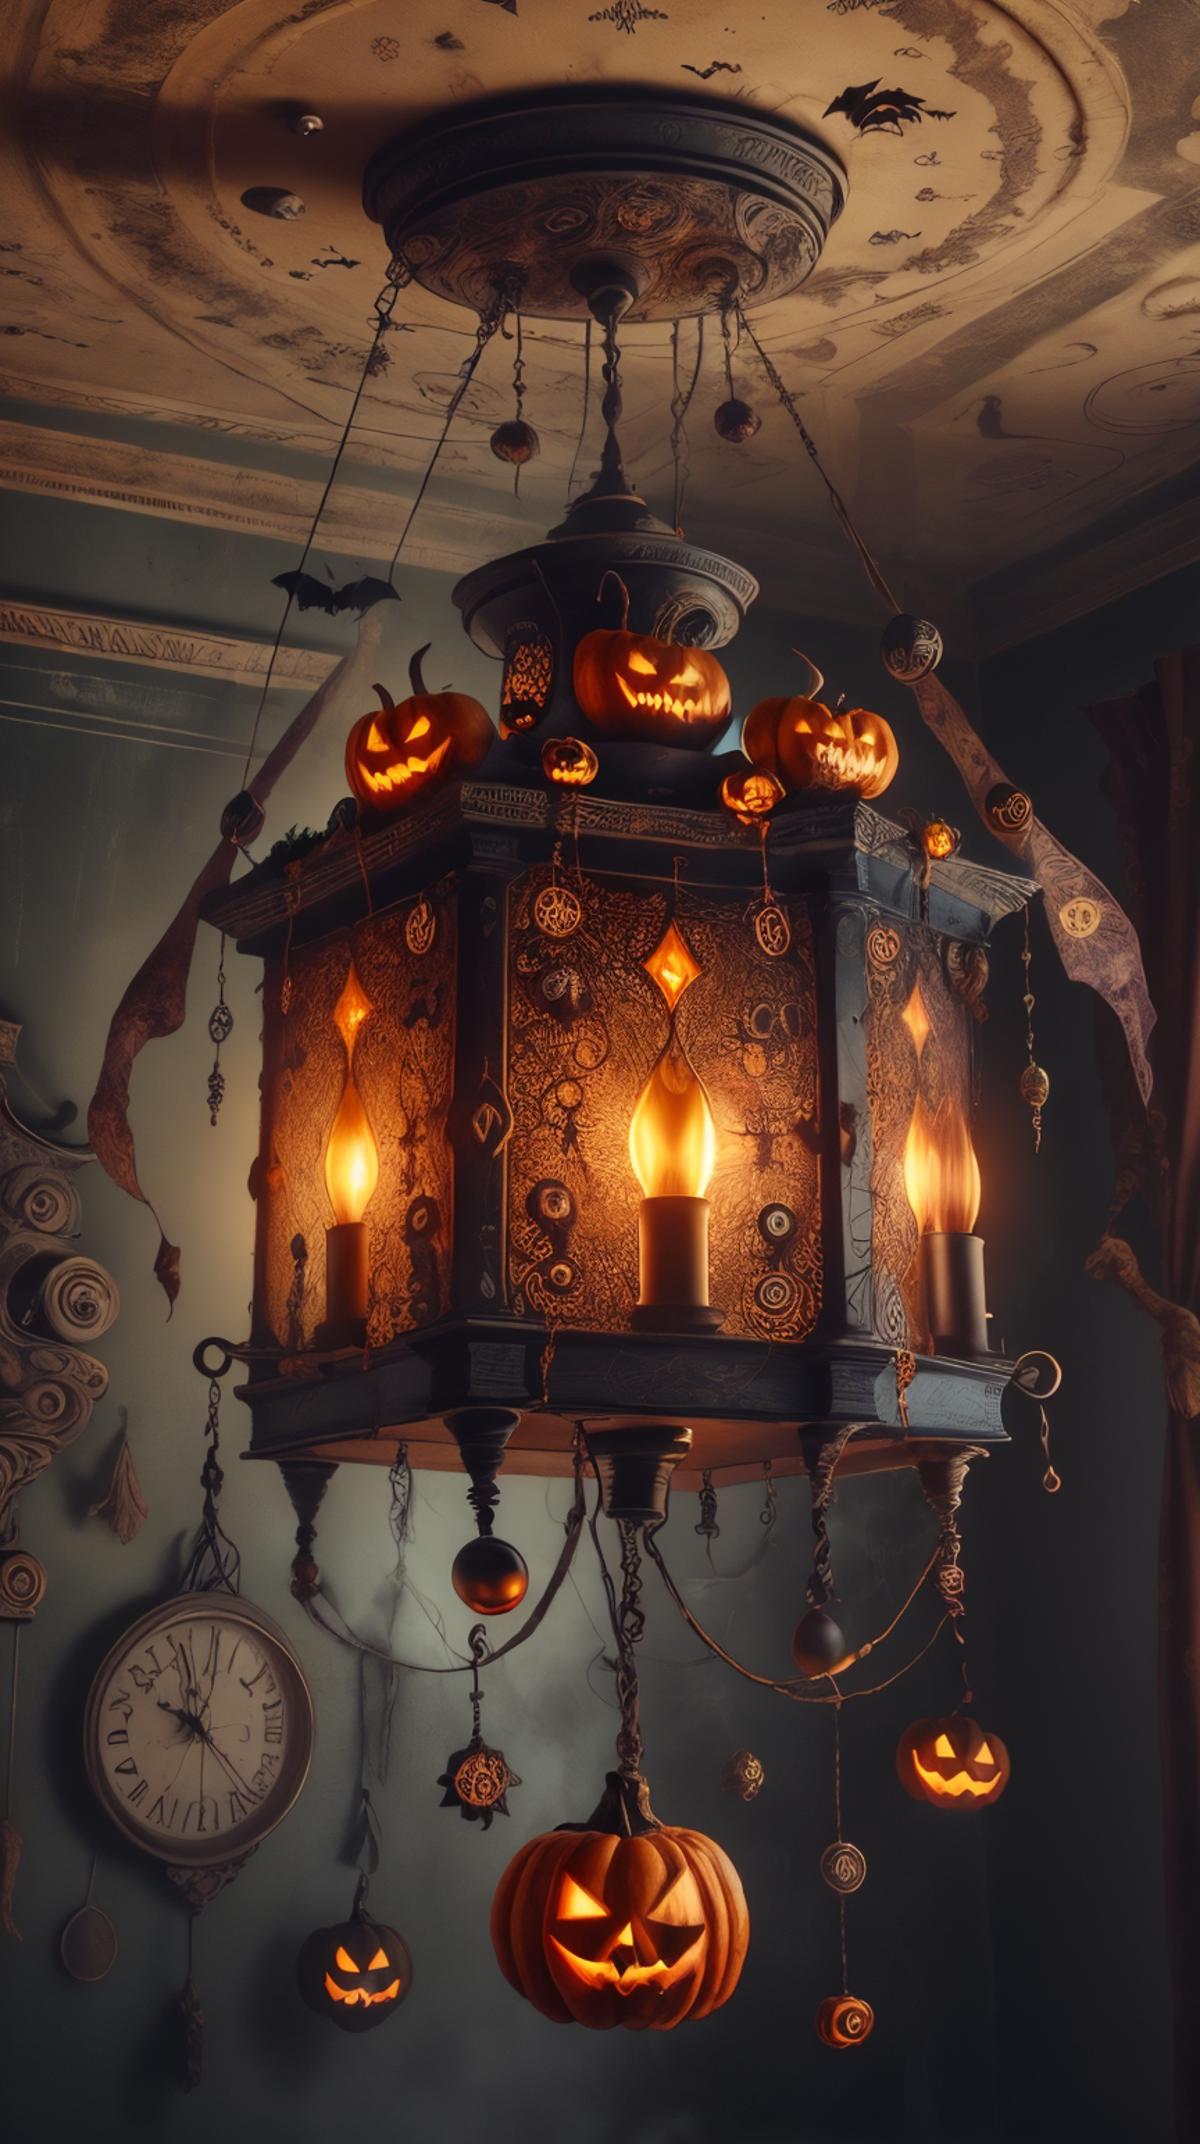 🎃 Halloween Glowing Style 🎃 image by mnemic